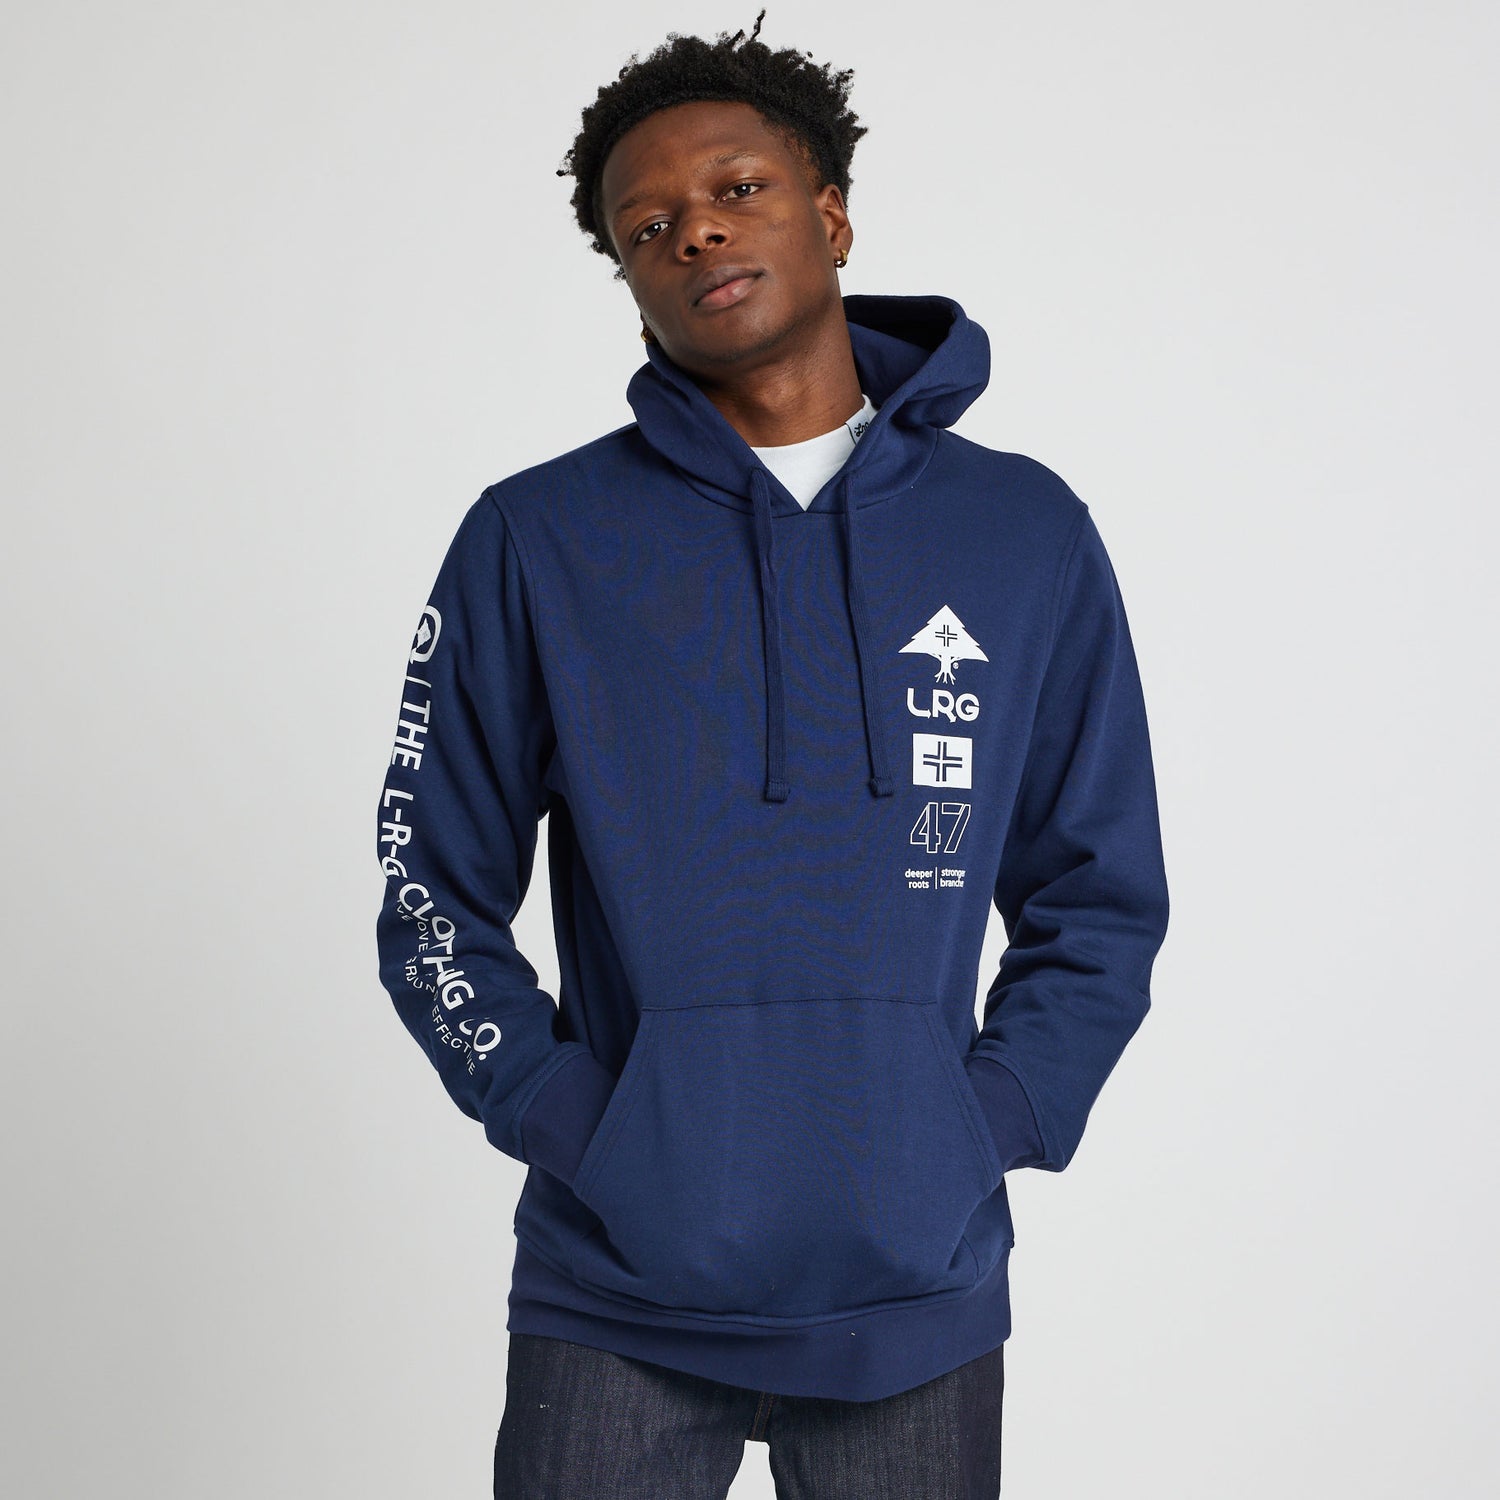 STRONGER BRANCHES PULLOVER HOODIE - NAVY